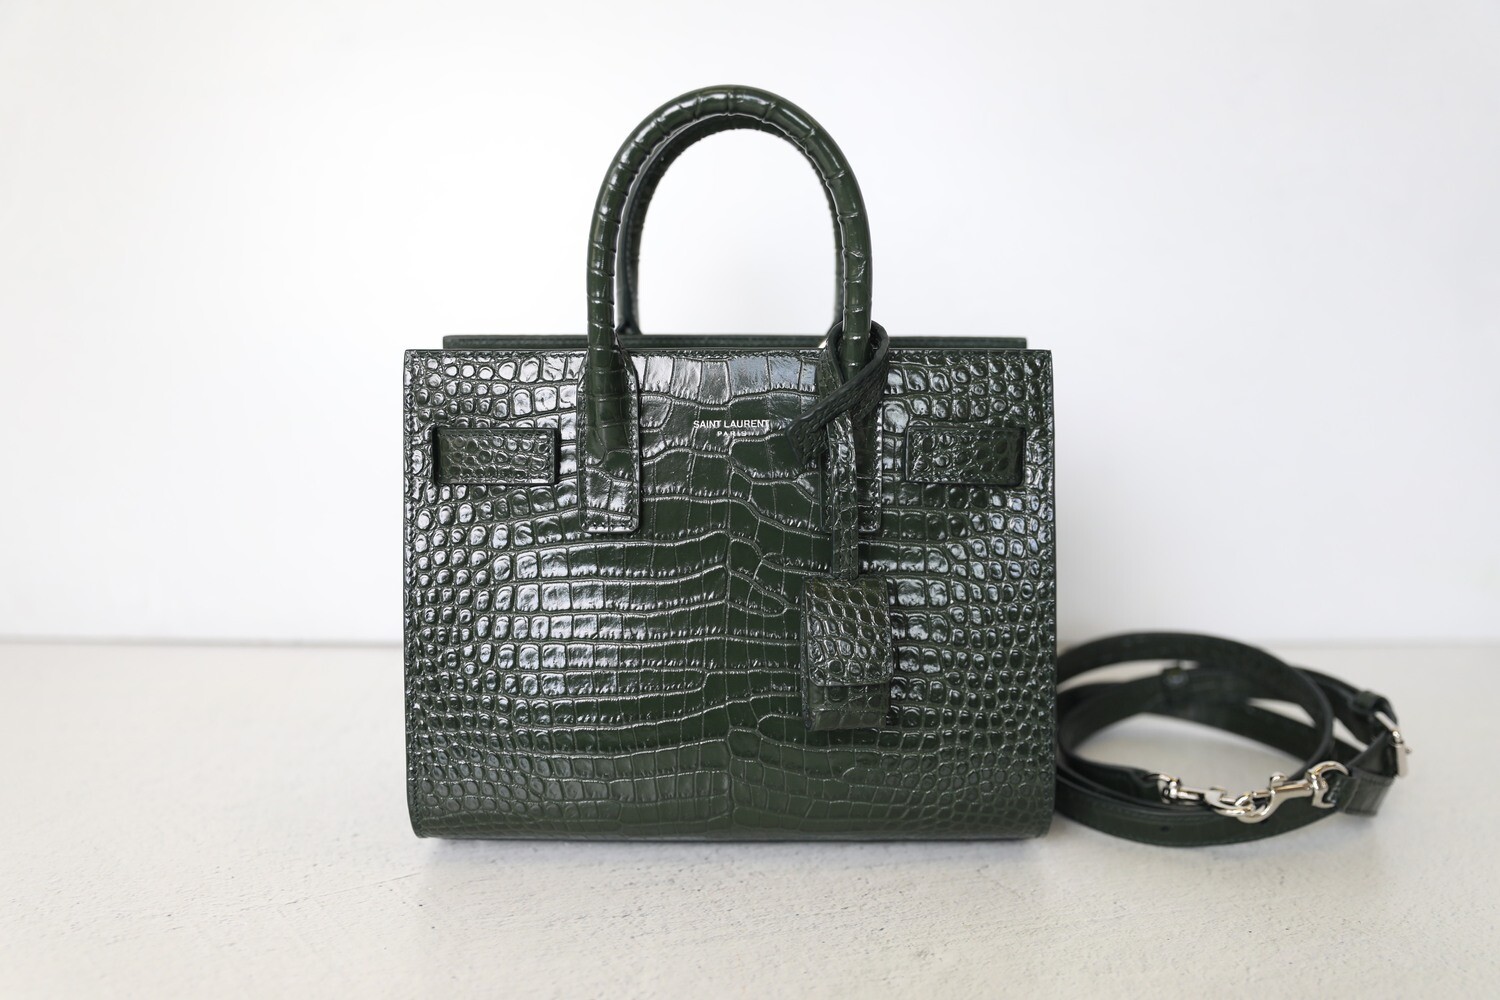 Saint Laurent Sac De Jour Nano, Green Croc Embossed Leather with Silver  Hardware, Preowned In Dustbag WA001